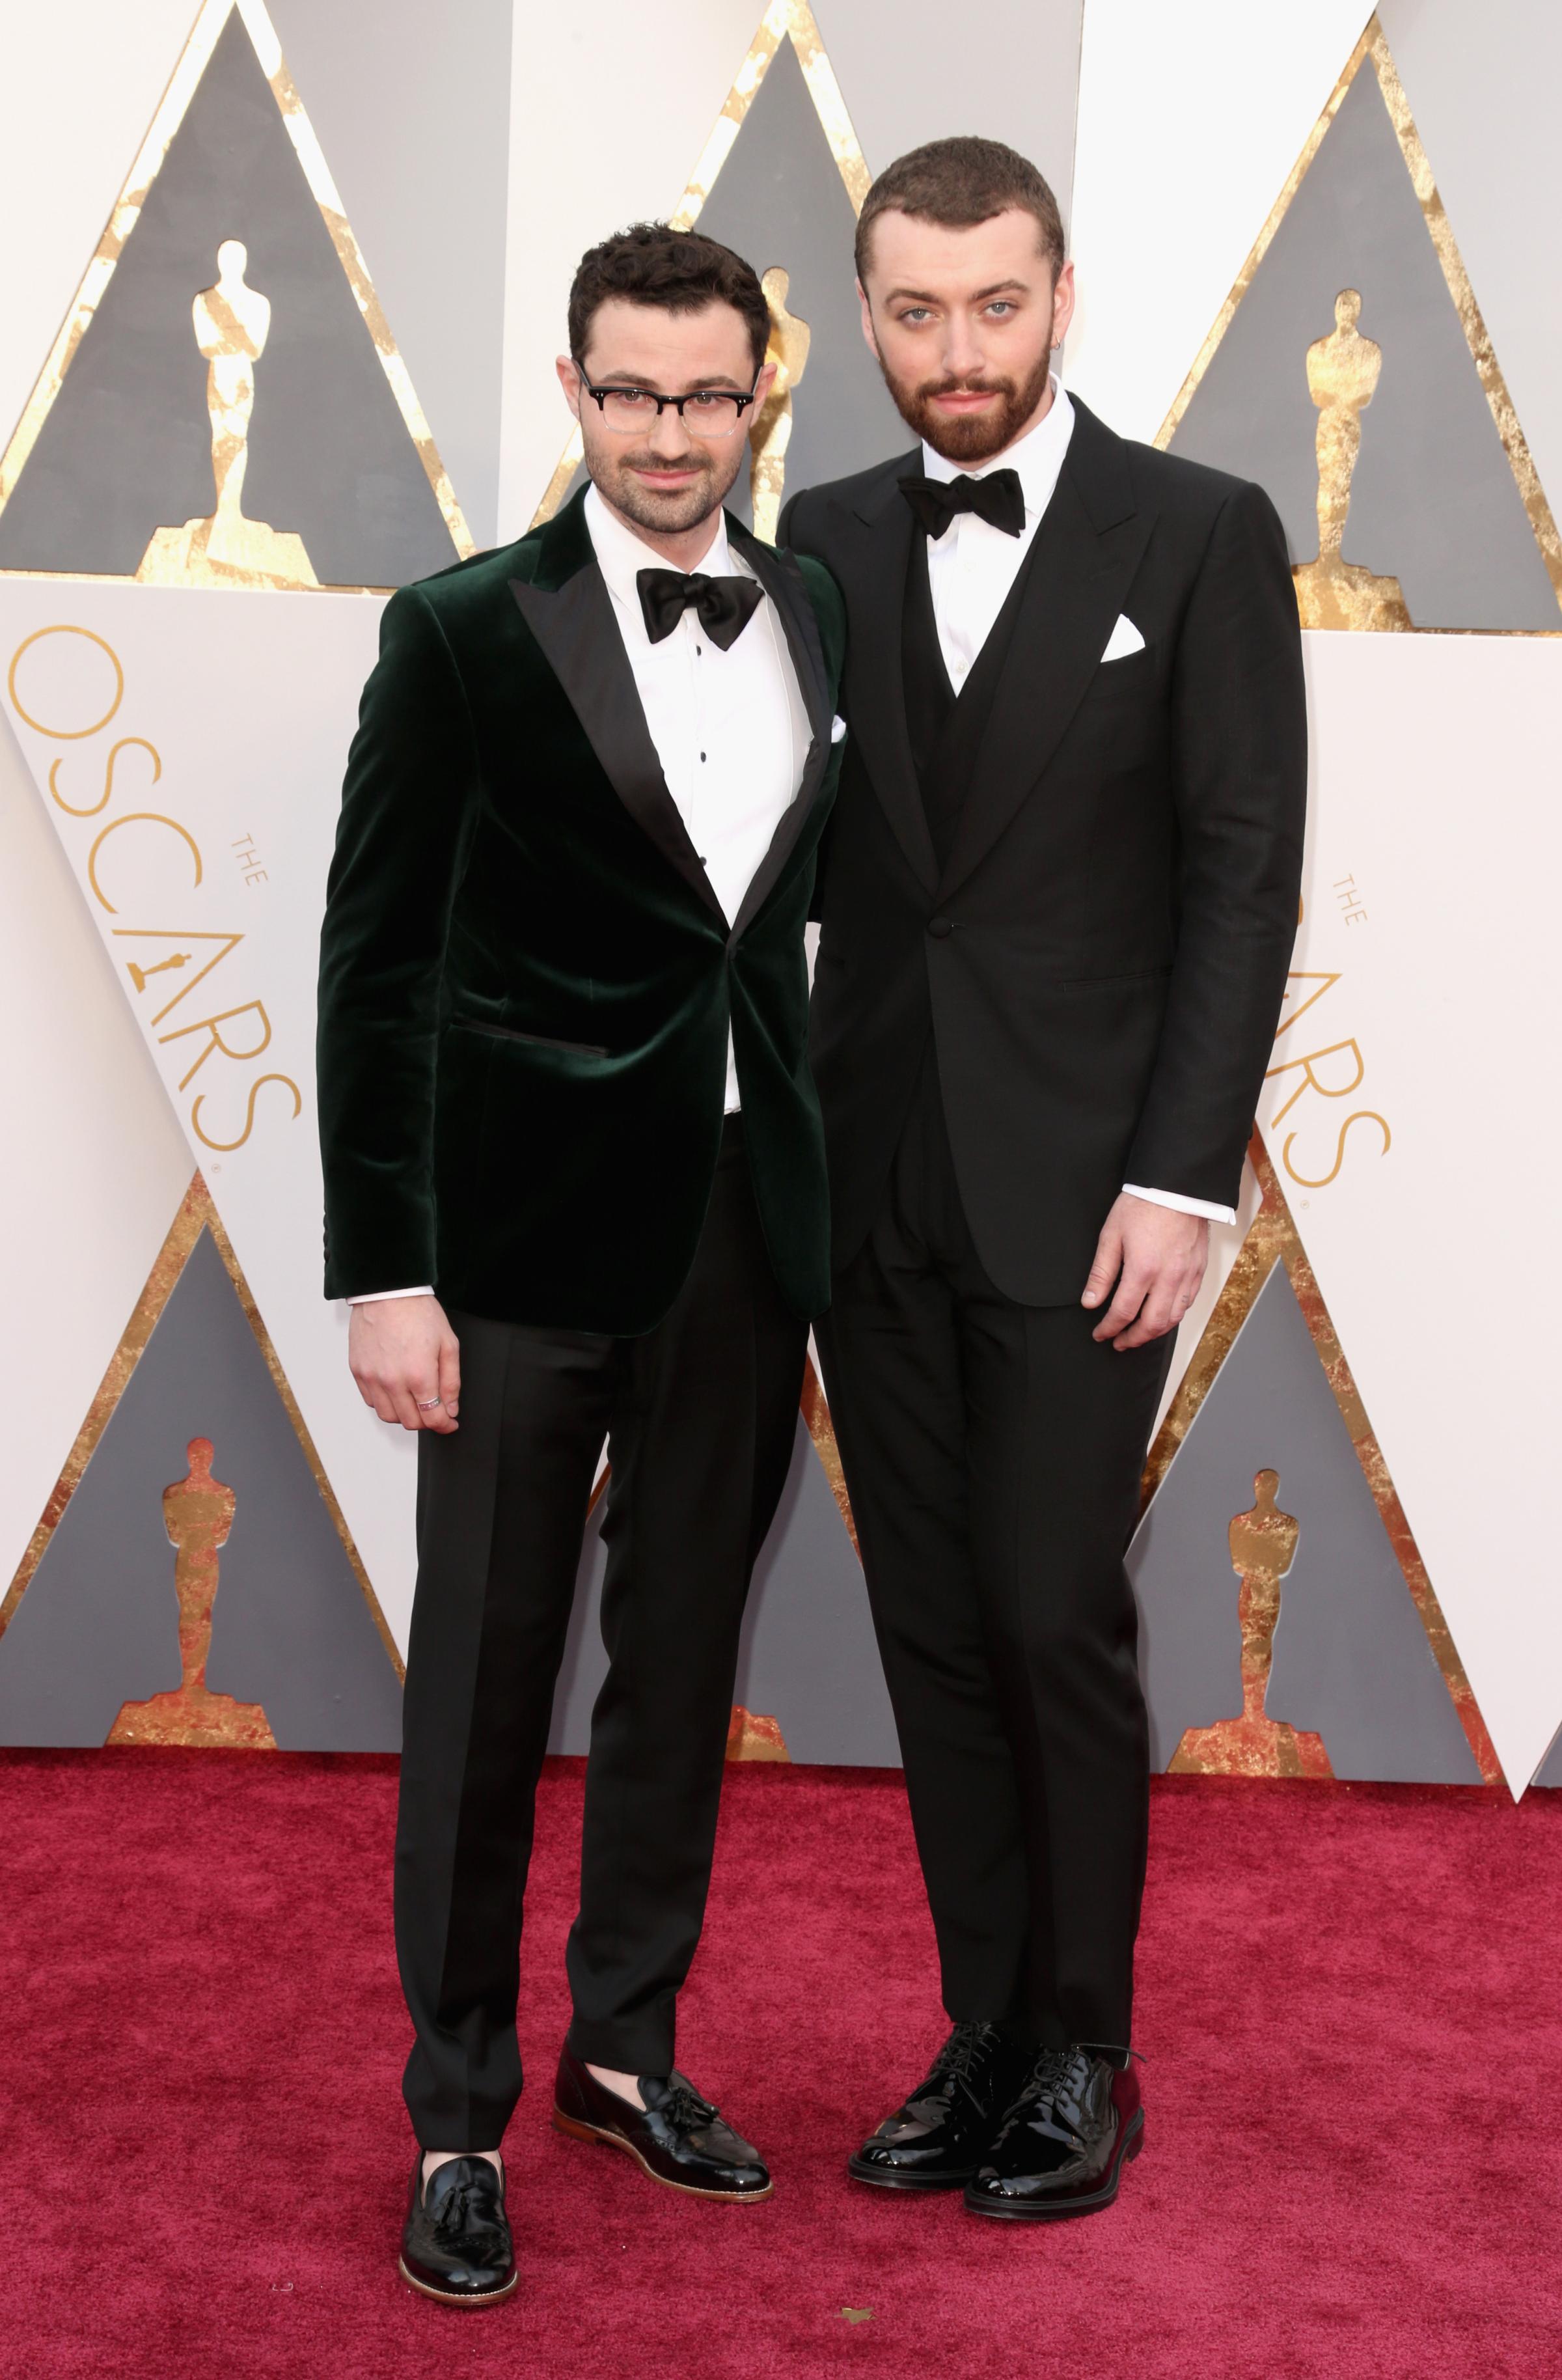 Jimmy Napes and Sam Smith attend the 88th Annual Academy Awards on Feb. 28, 2016 in Hollywood, Calif.